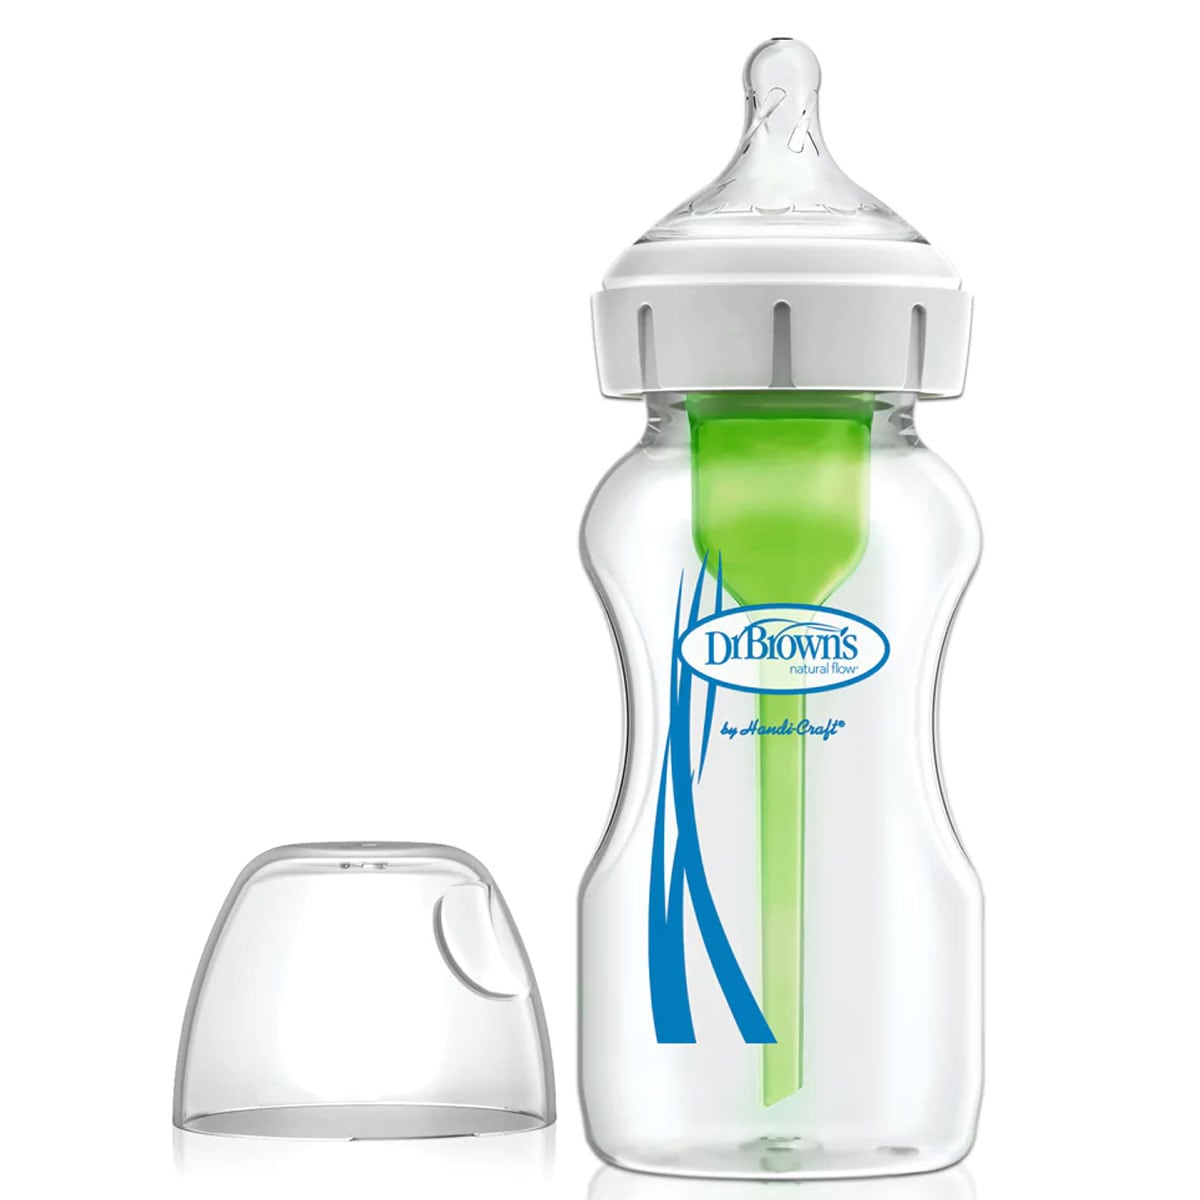 Dr Brown's Options+ Glass Wide Neck Baby Bottle 270ml